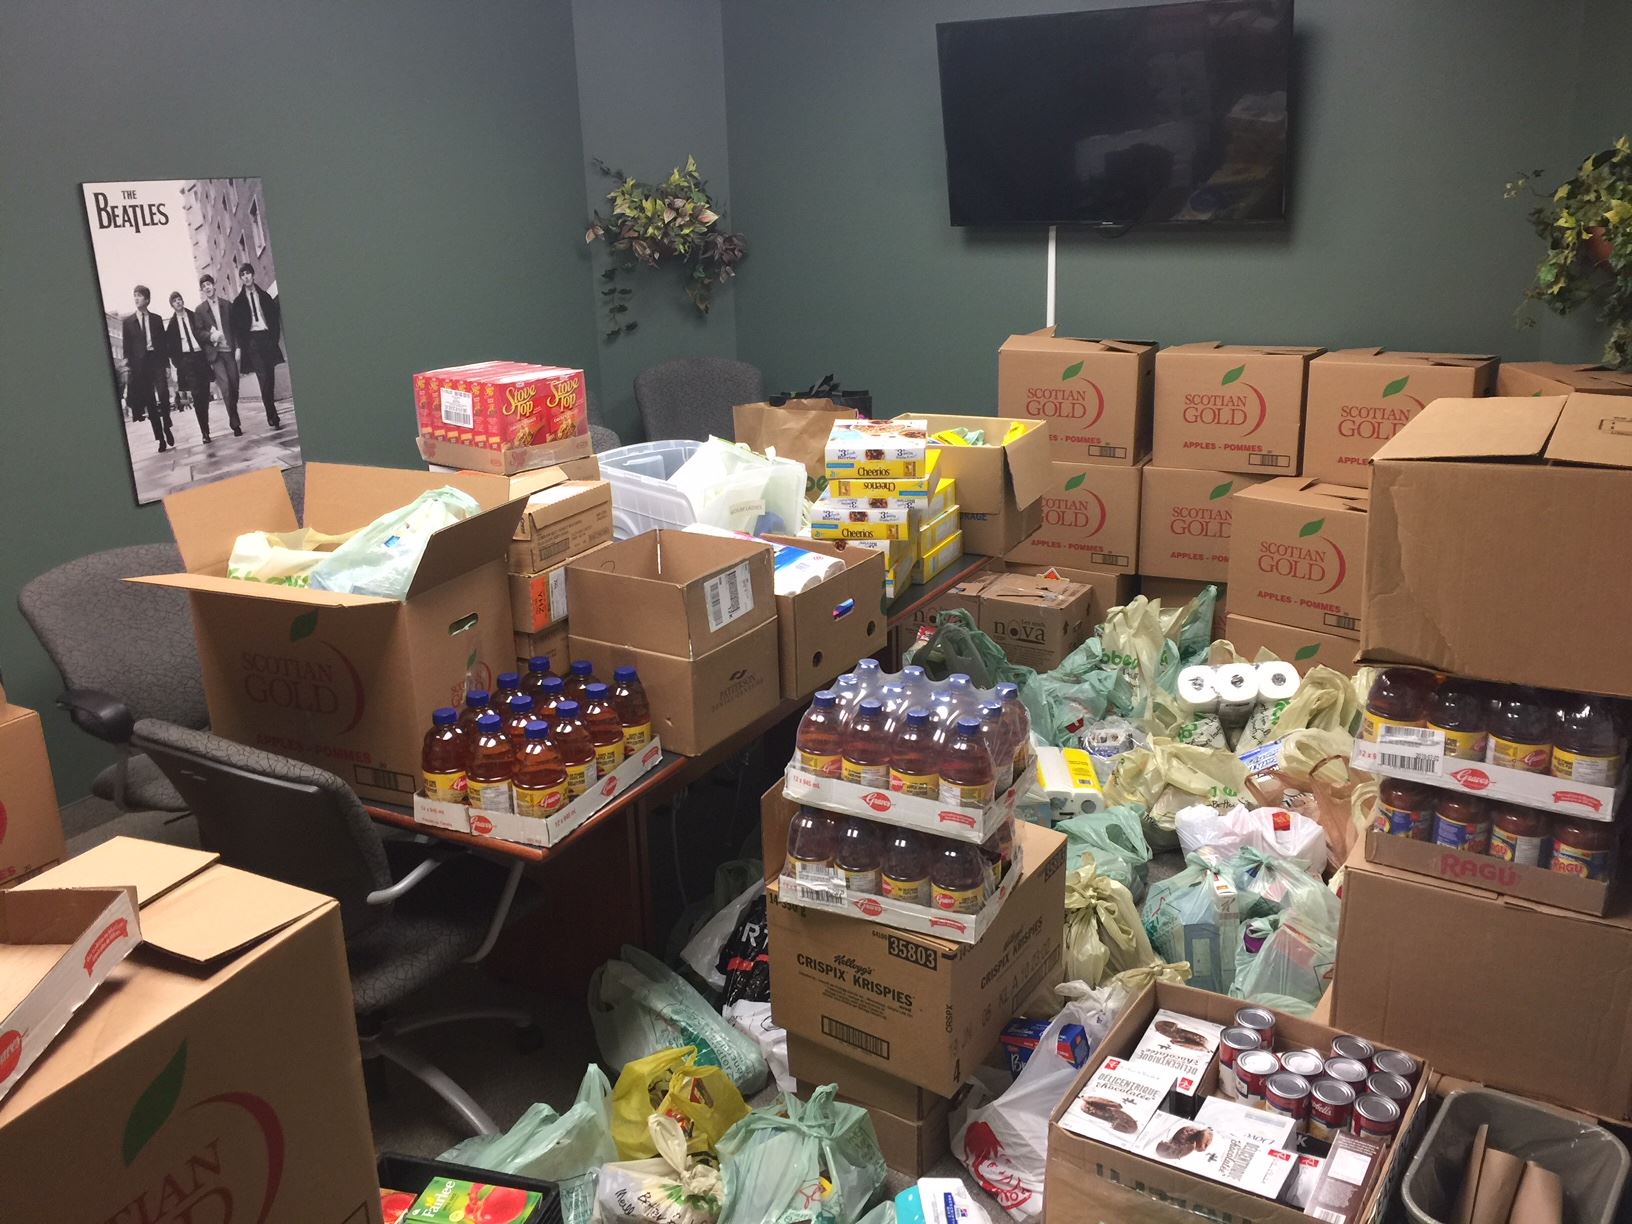 gates insurance and k-rock food drive